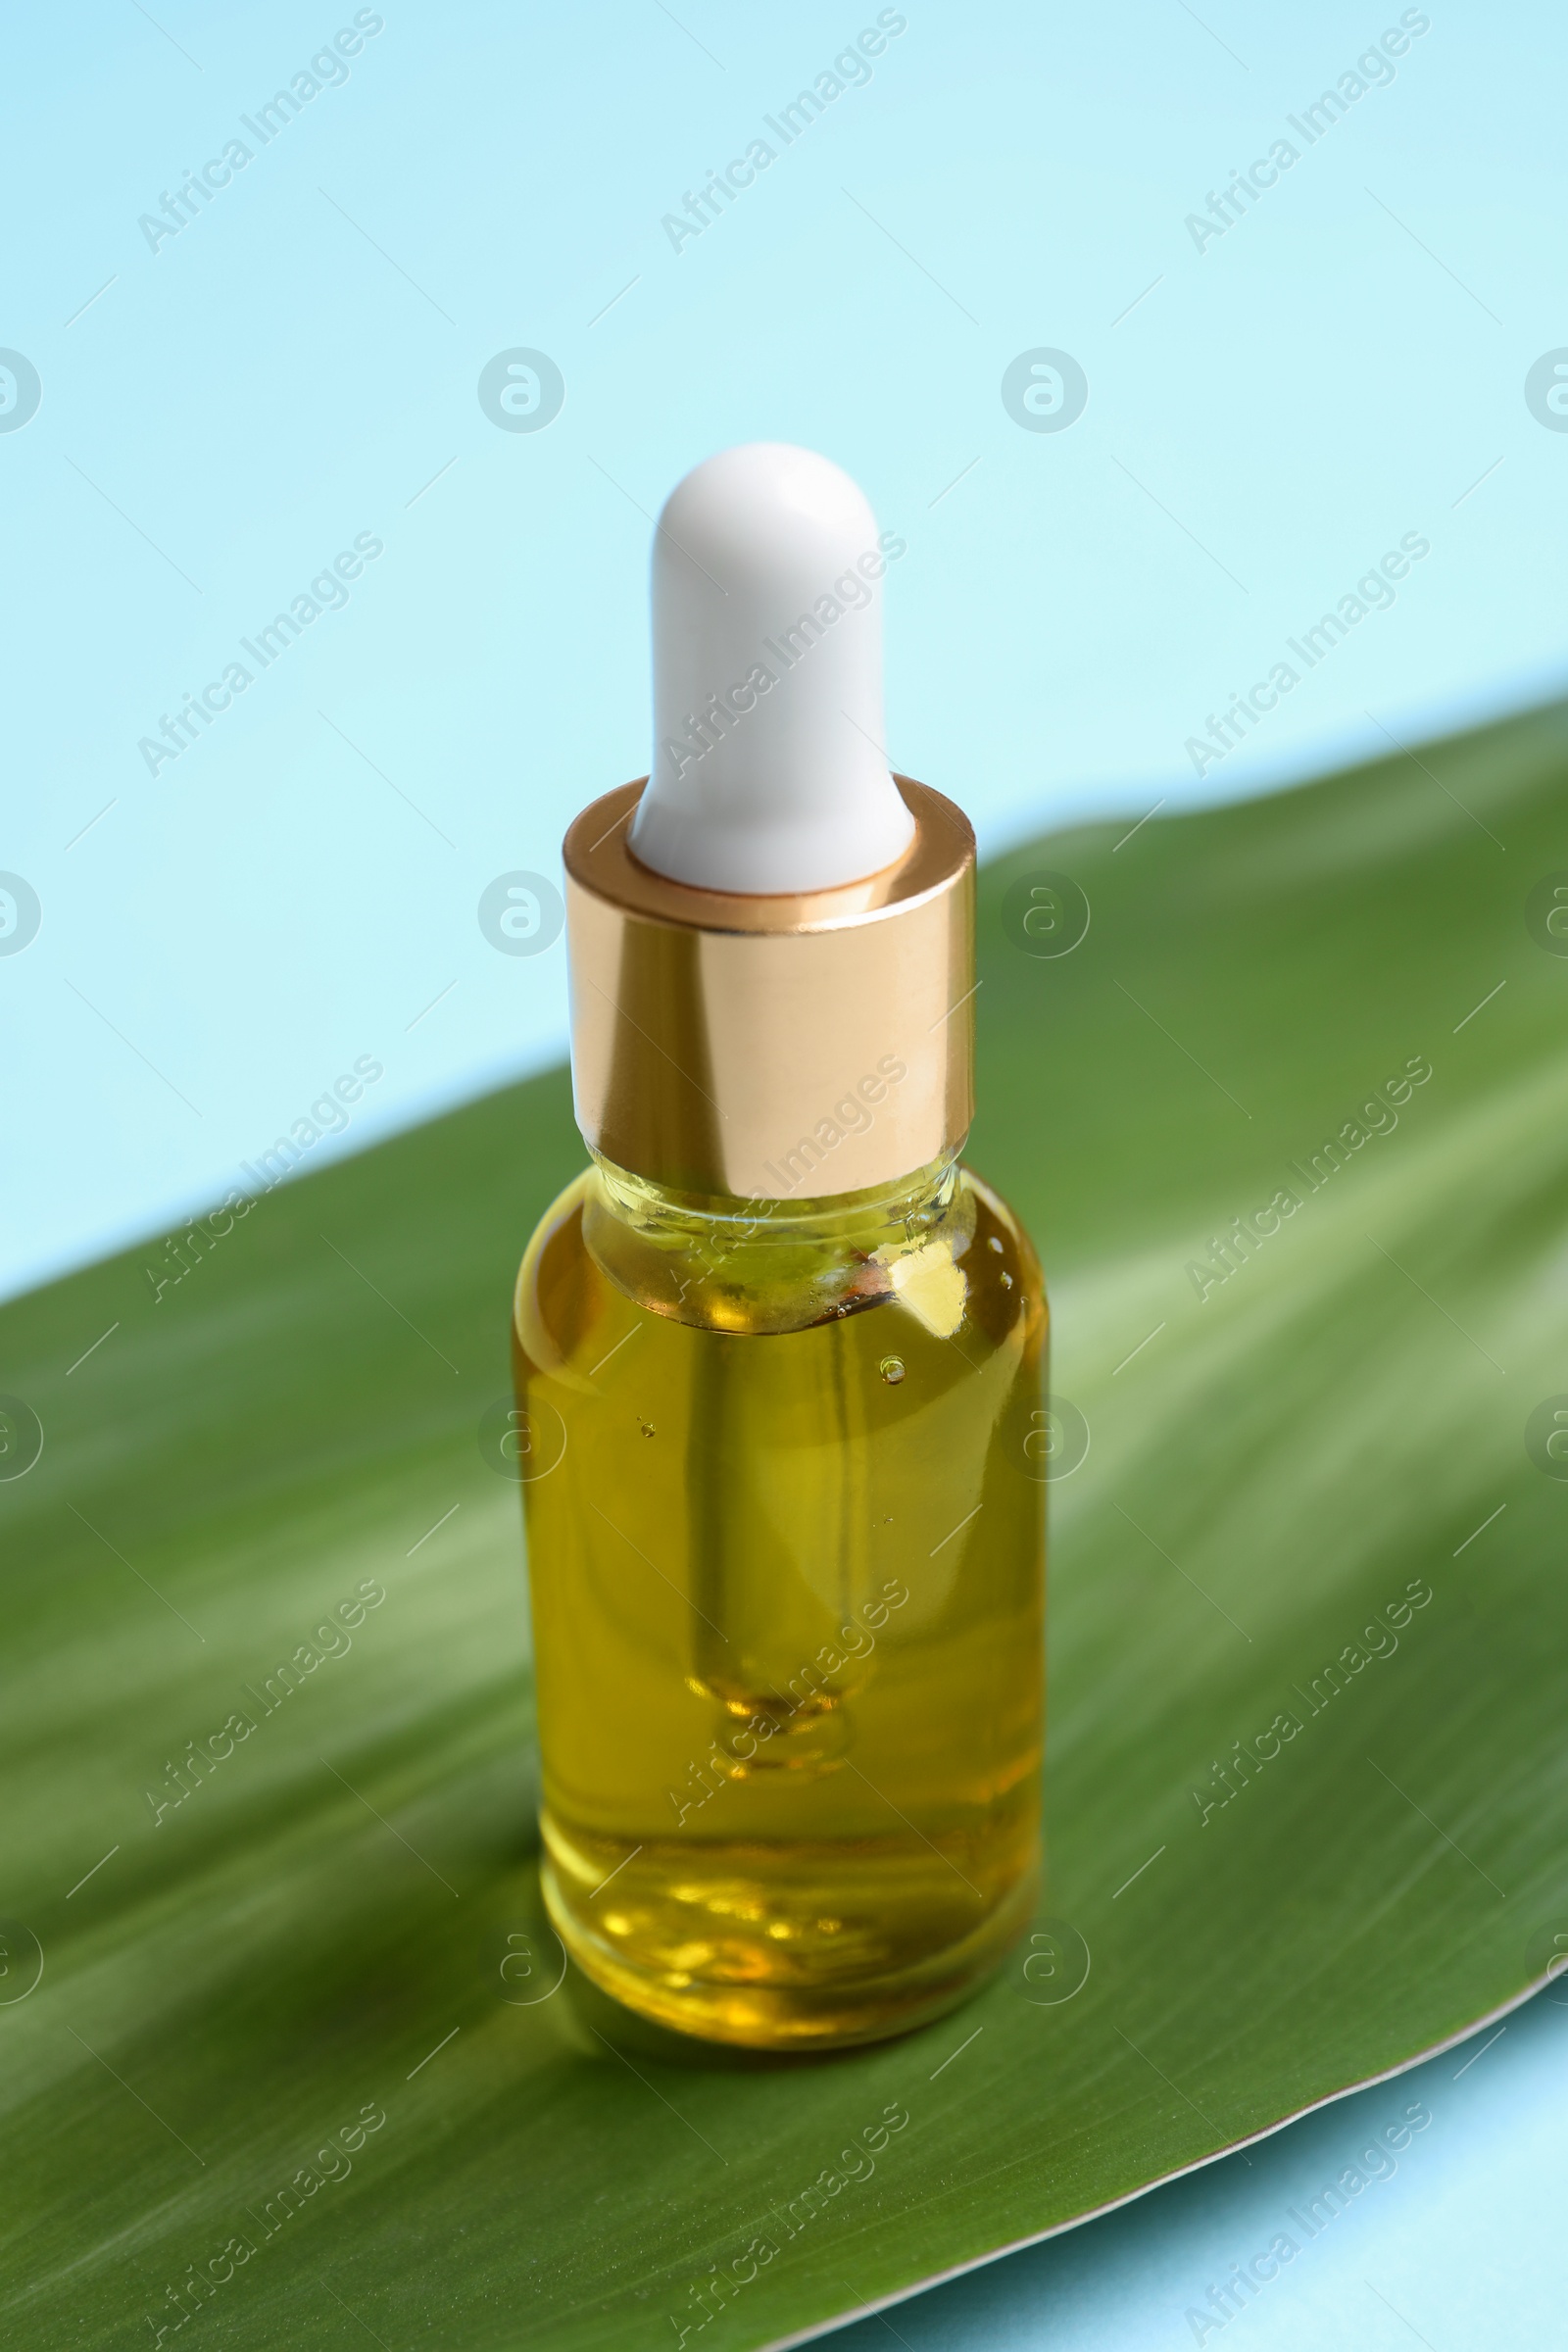 Photo of Bottle with cosmetic oil and green leaf on light blue background, closeup